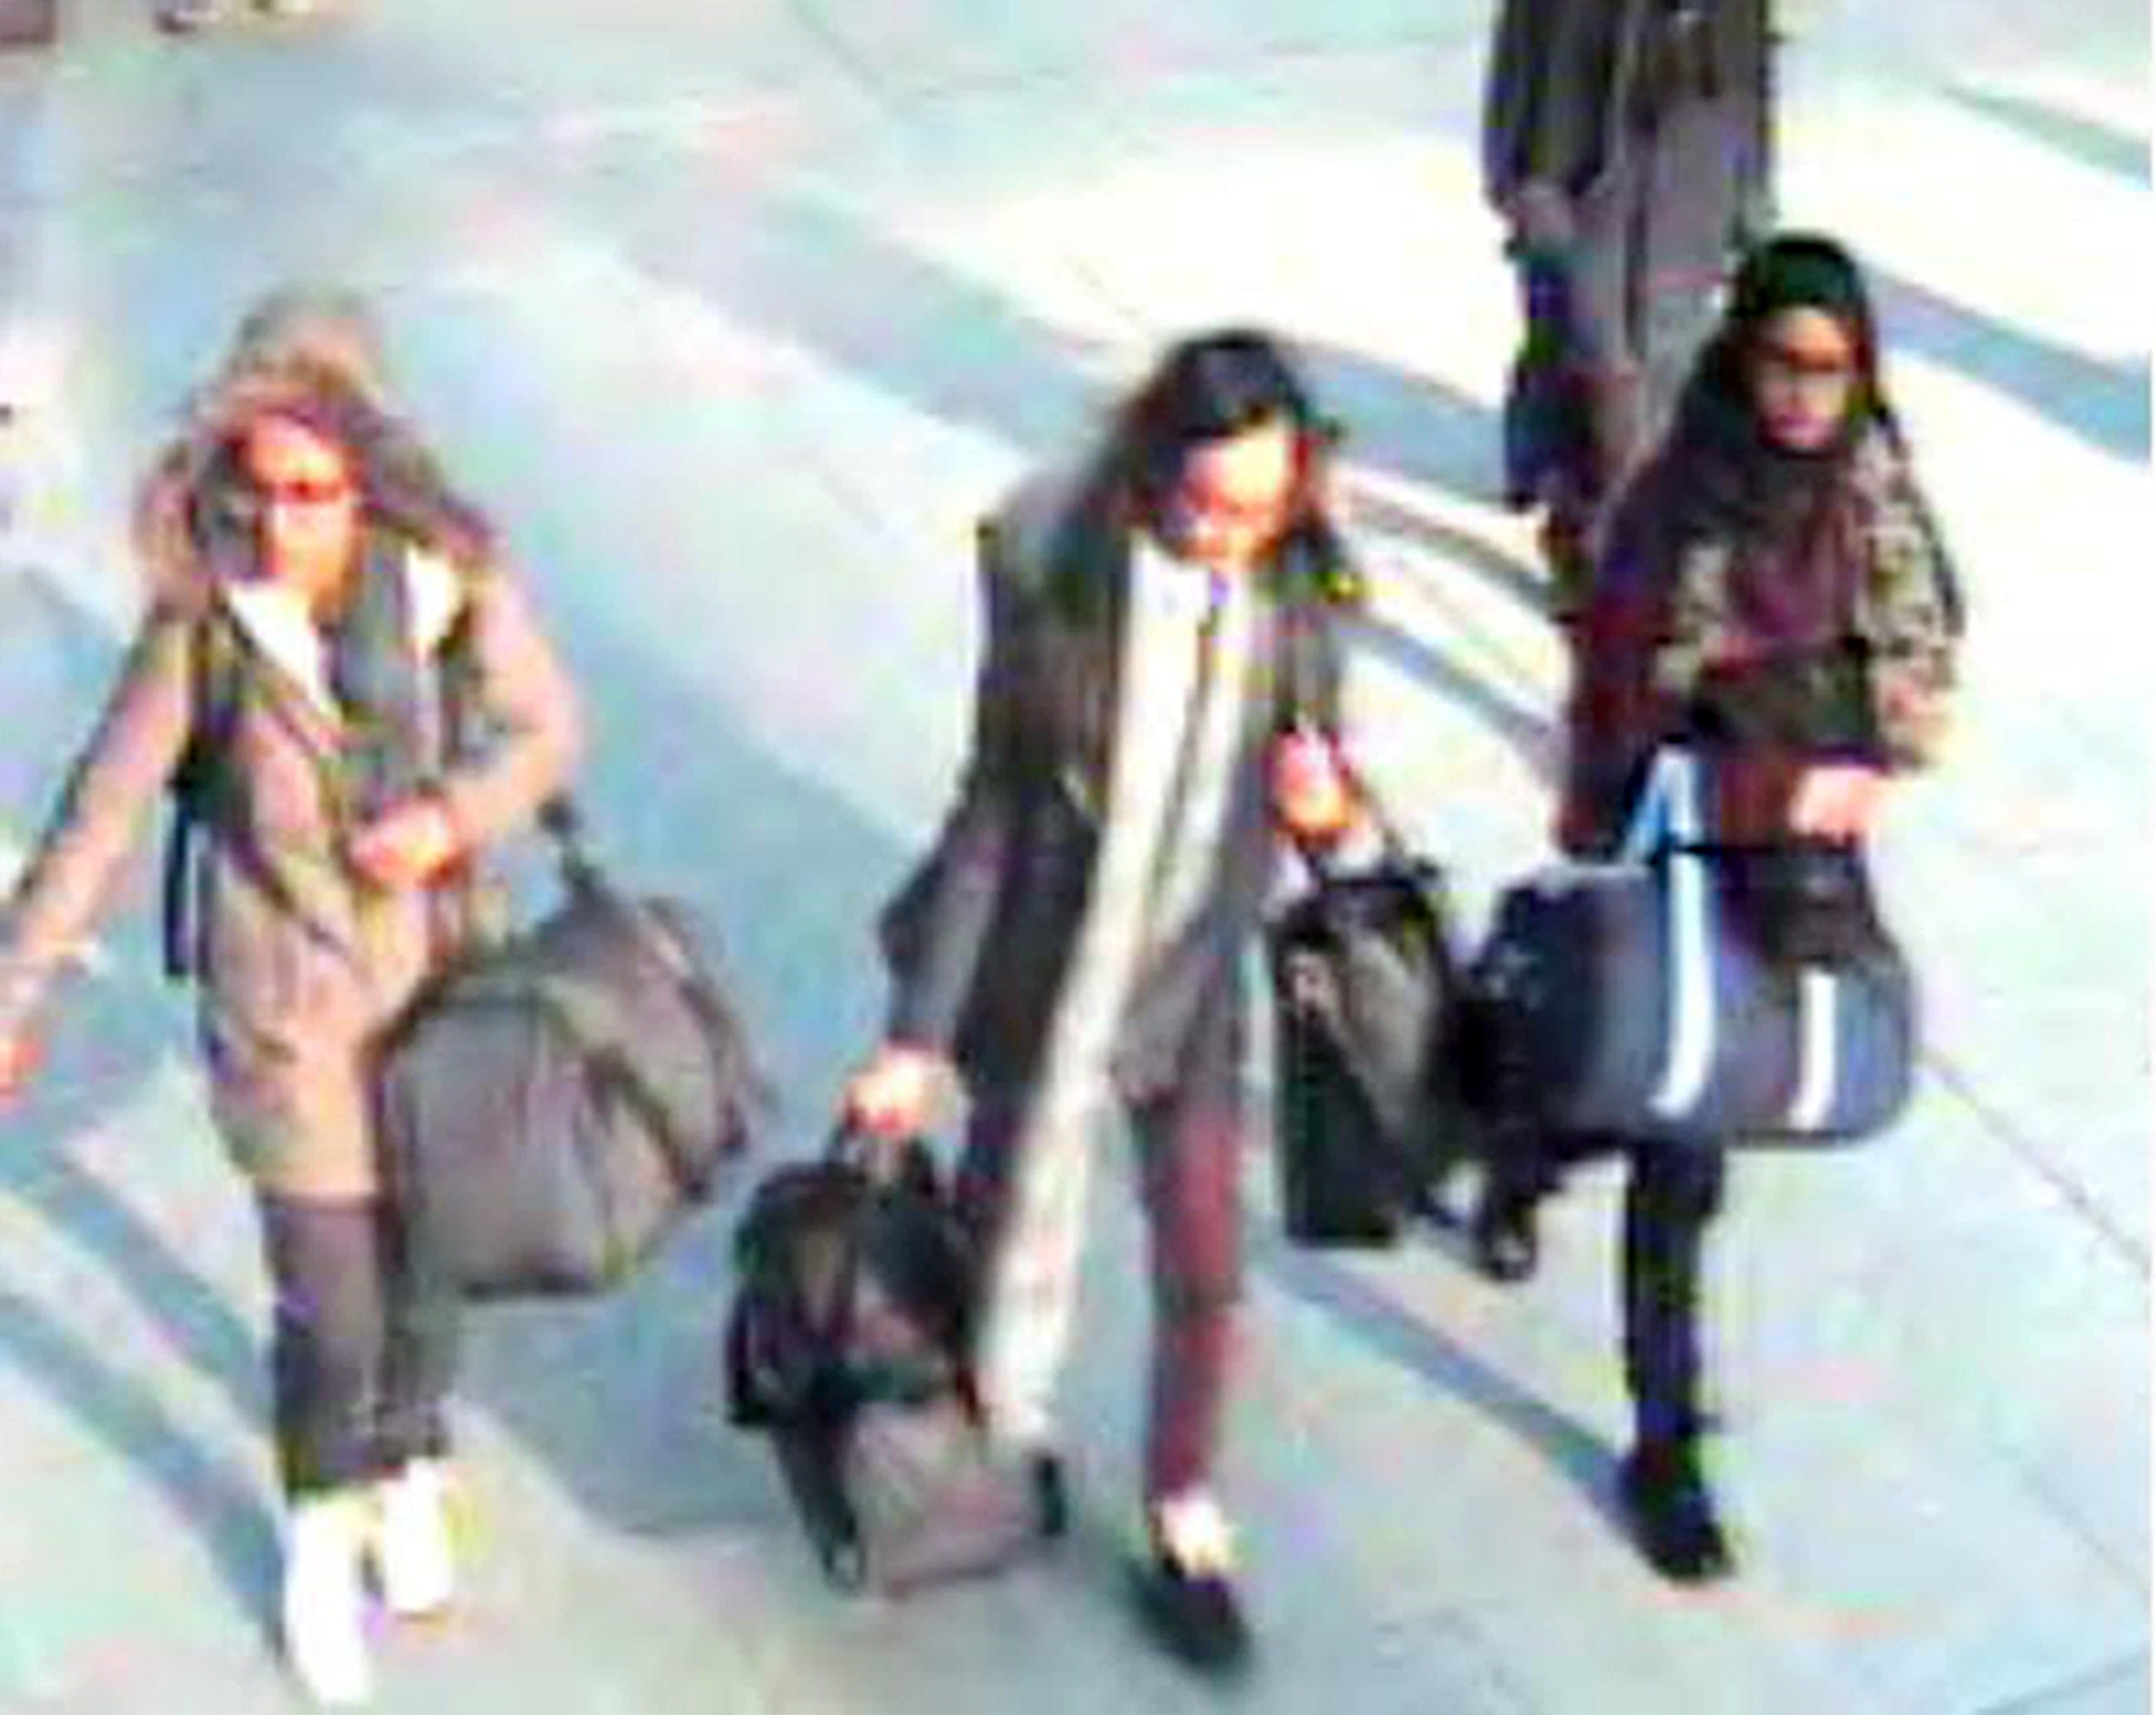 Shamima Begum was able to travel to Syria with two schoolfriends aged 15